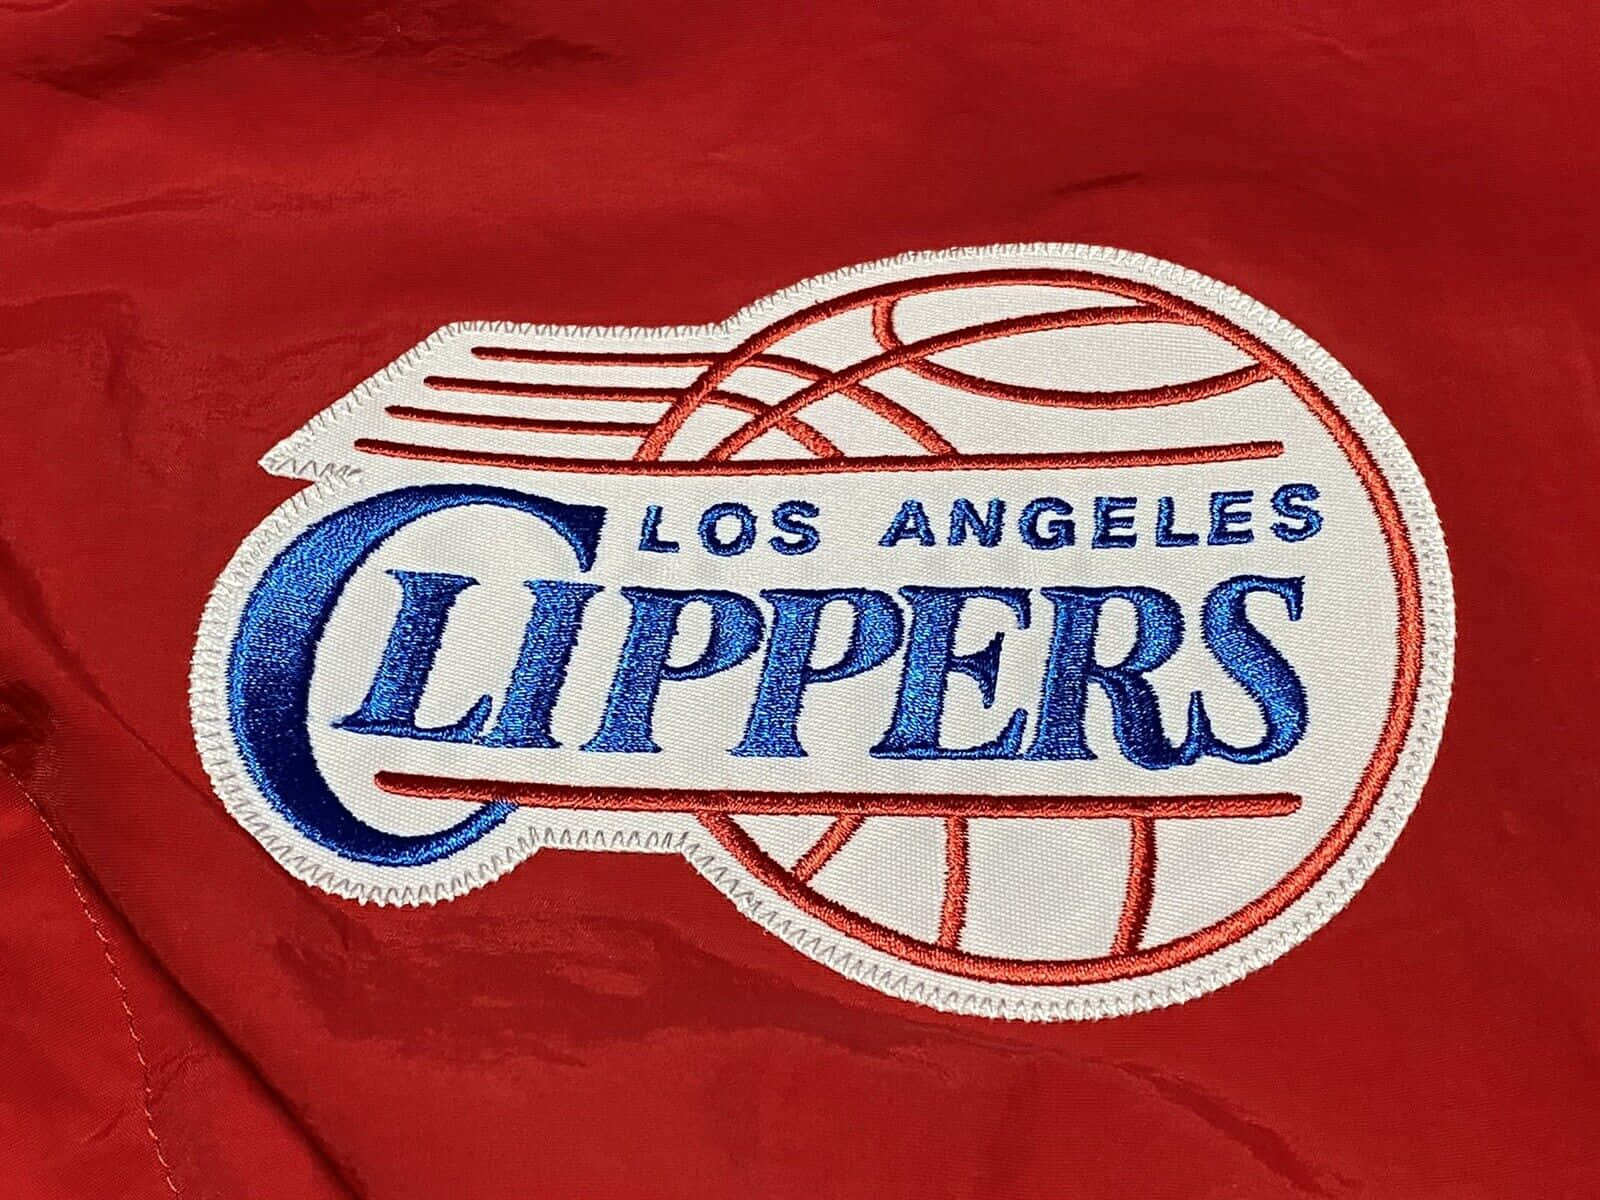 2010 LA Clippers Embossed Logo Red Cloth Close Up Shot Wallpaper